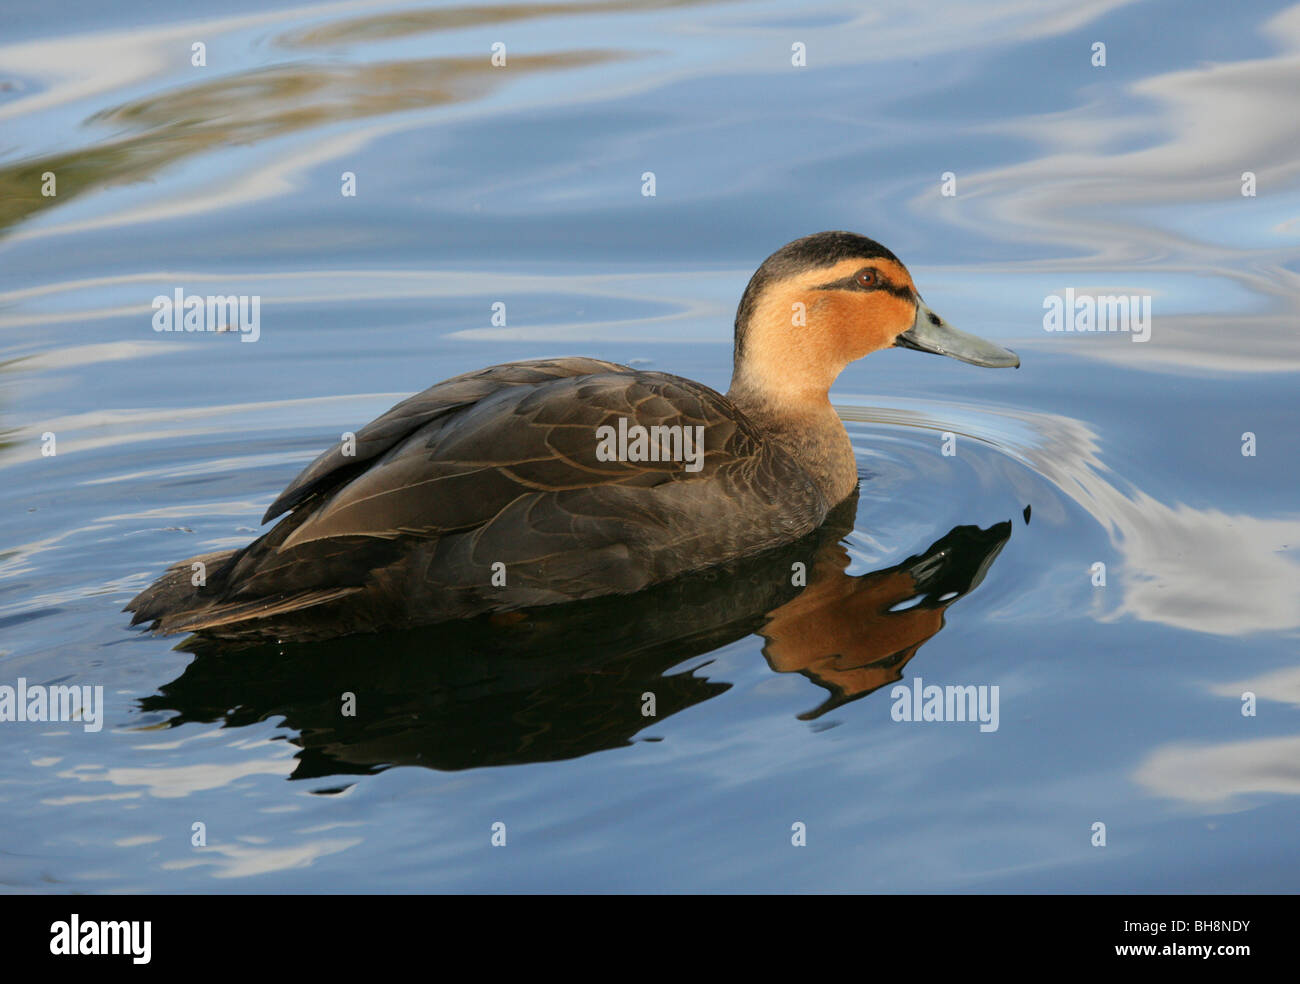 Philippine Duck, Anas luzonica, Anatidae. Rare Duck from the Philippines, Asia. On the IUCN Red List of Threatened Species 2006. Stock Photo